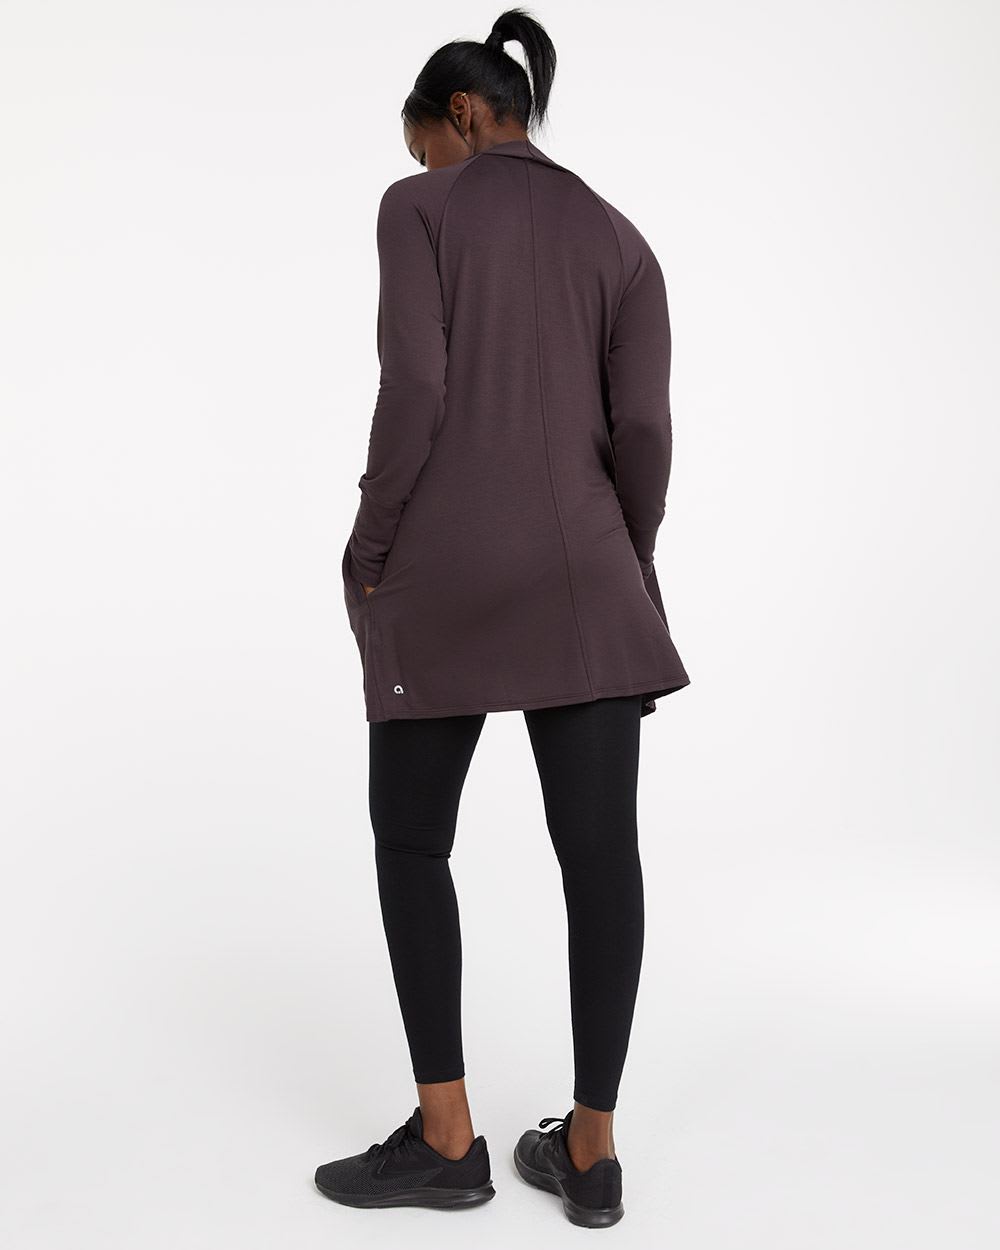 Long-Sleeve Open Cardigan with Side Pockets, Hyba